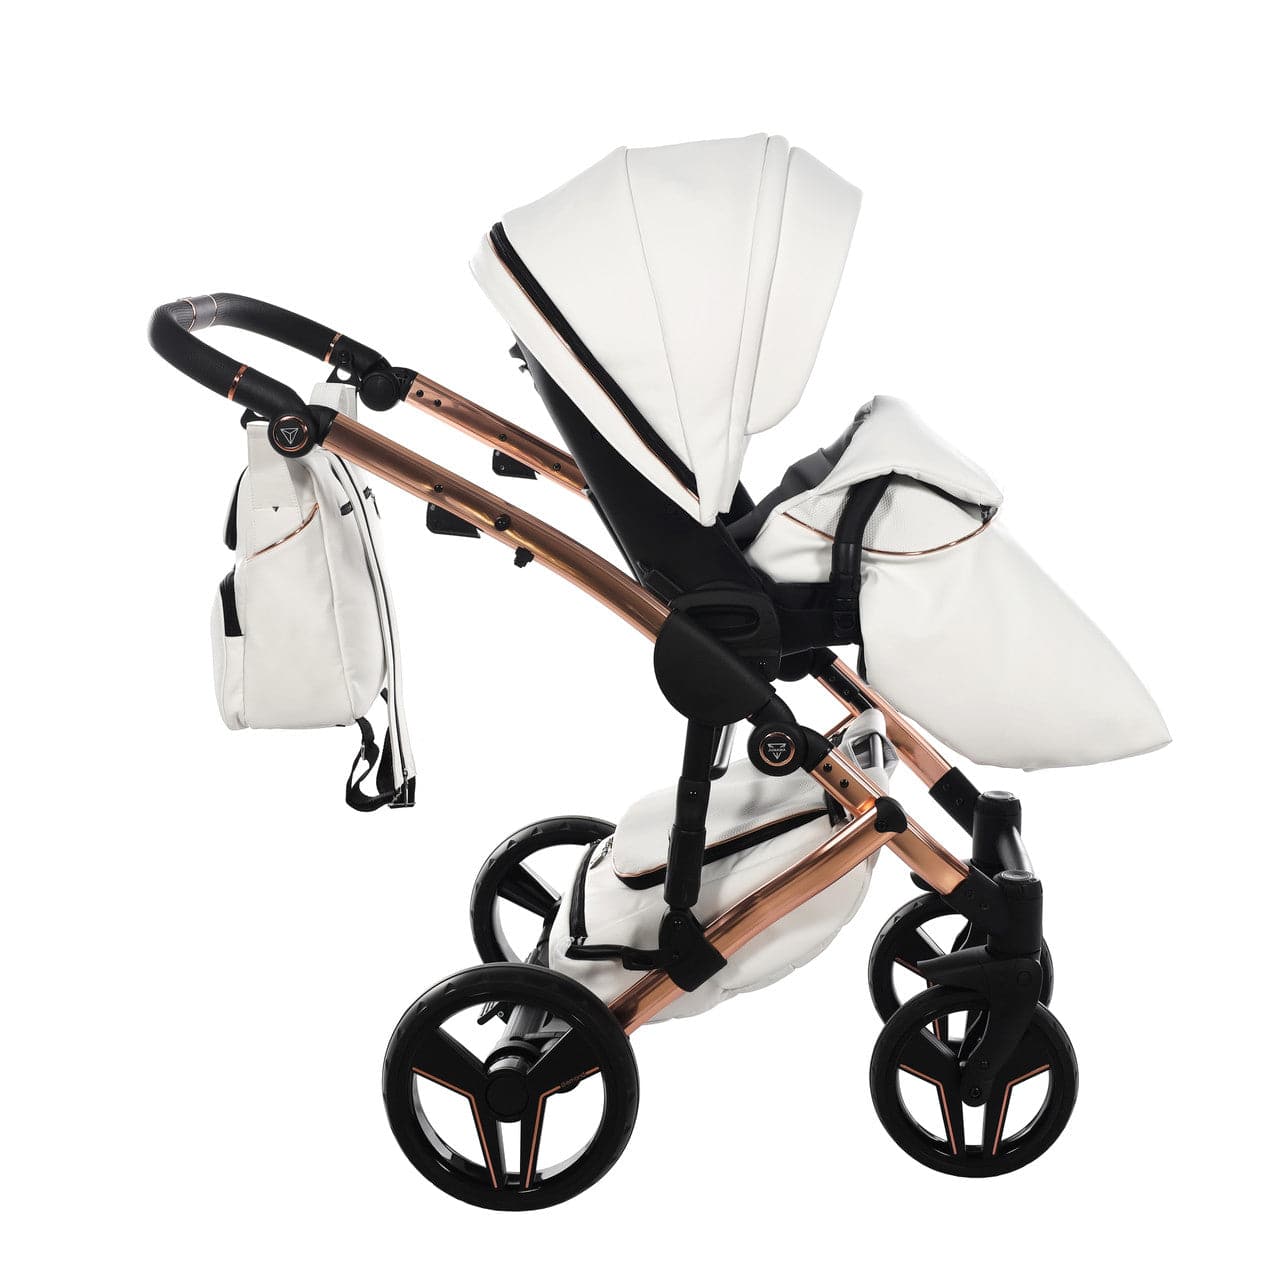 Junama S-Class 2 In 1 Pram - White - For Your Little One